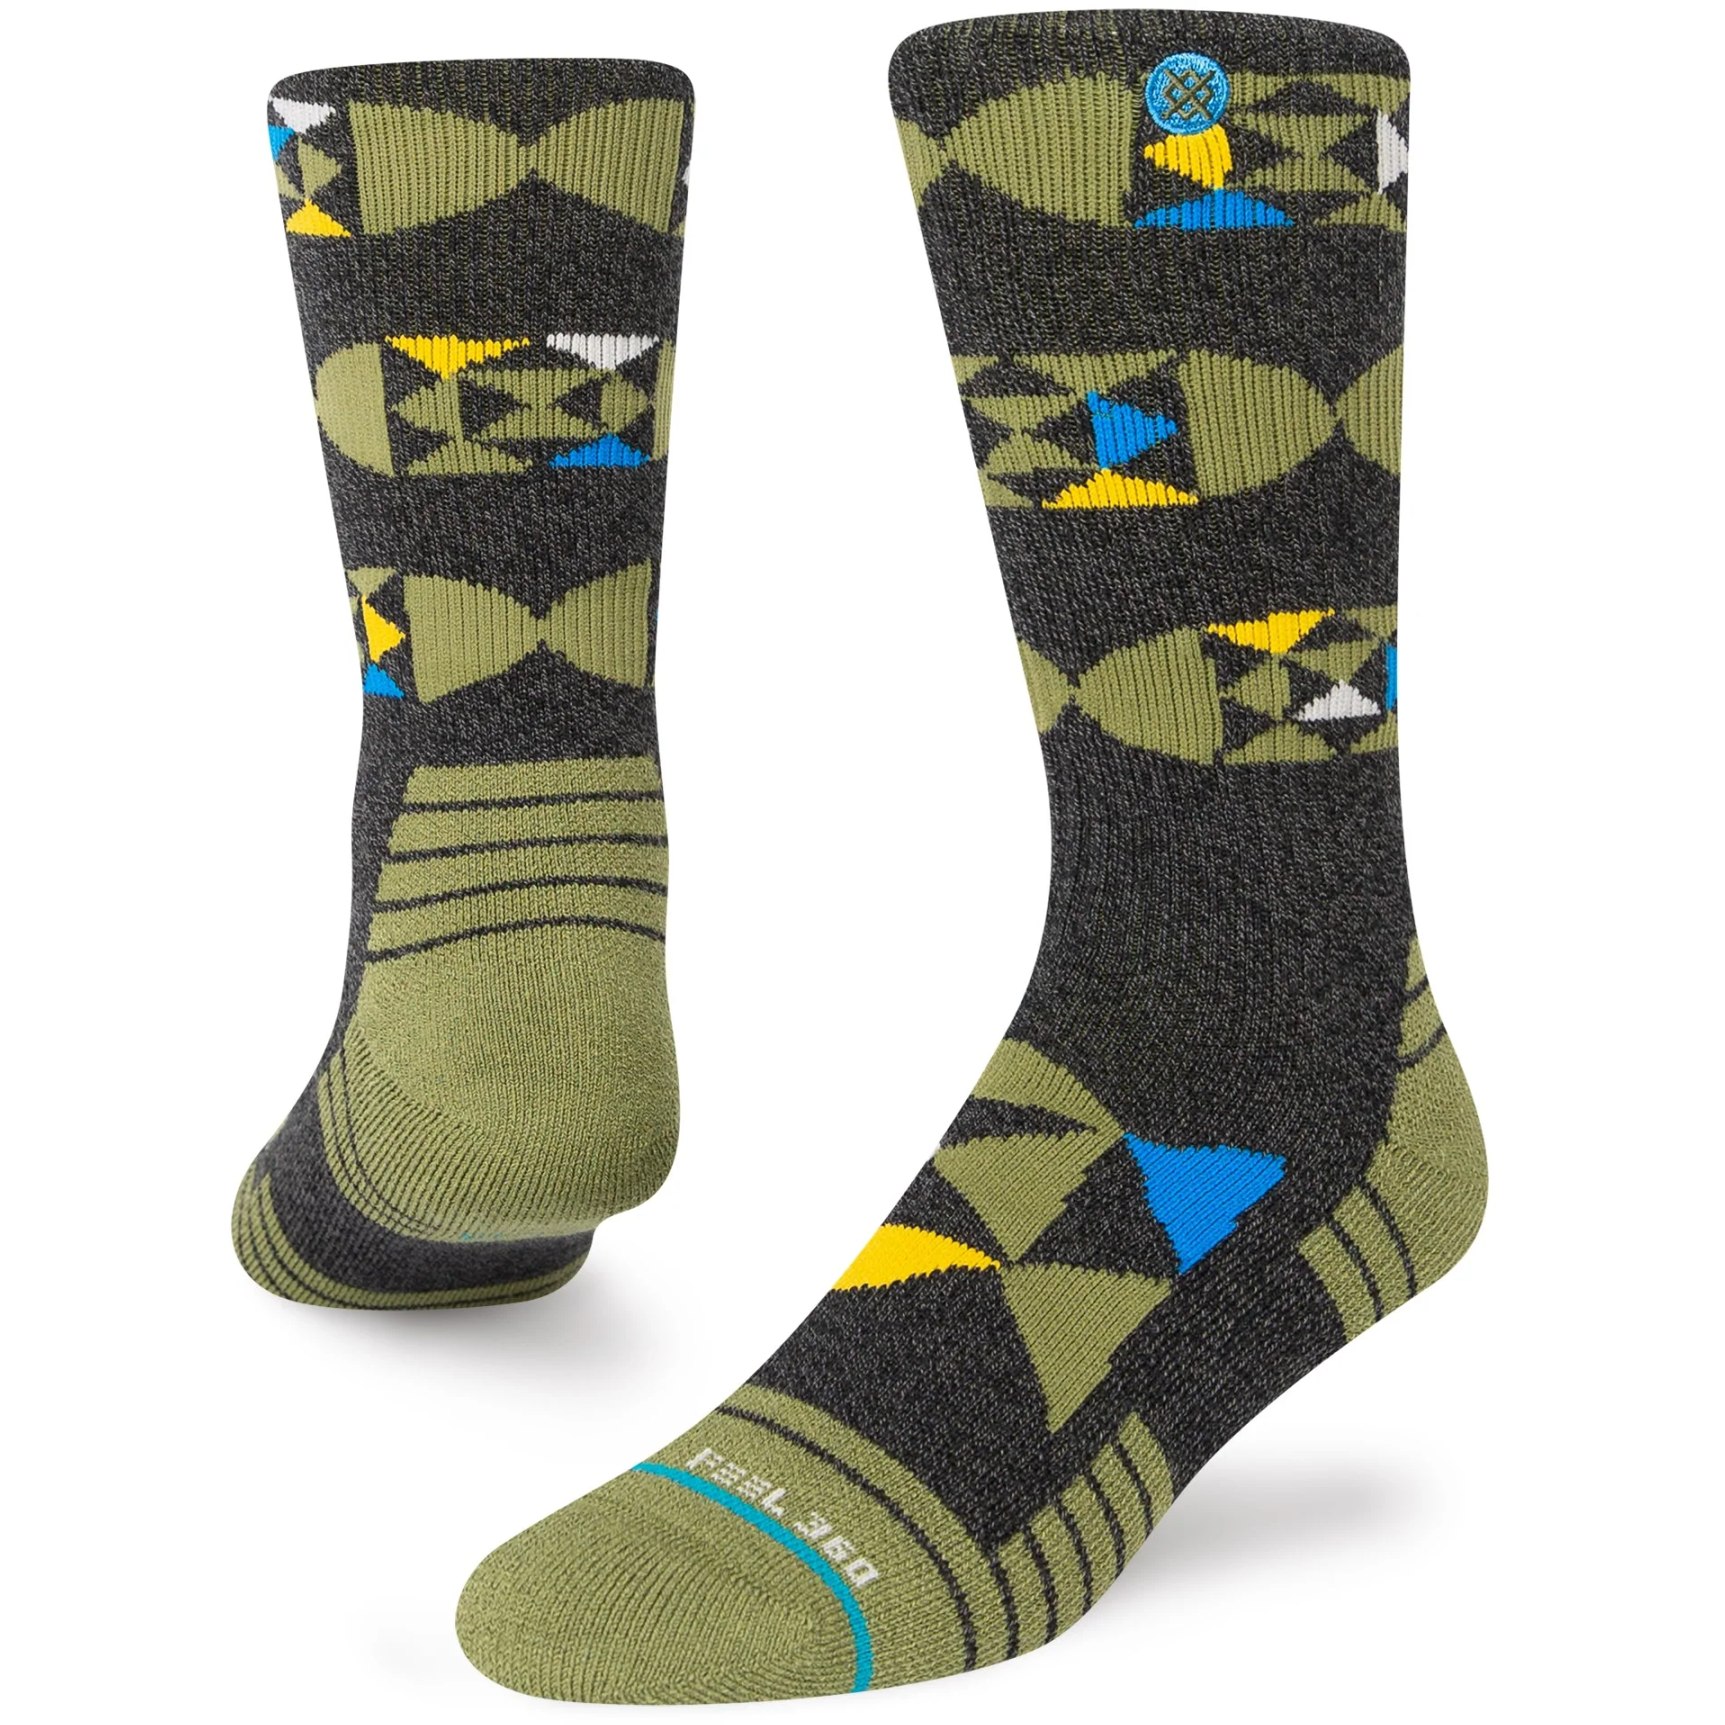 Picture of Stance Geodes Crew Socks - black